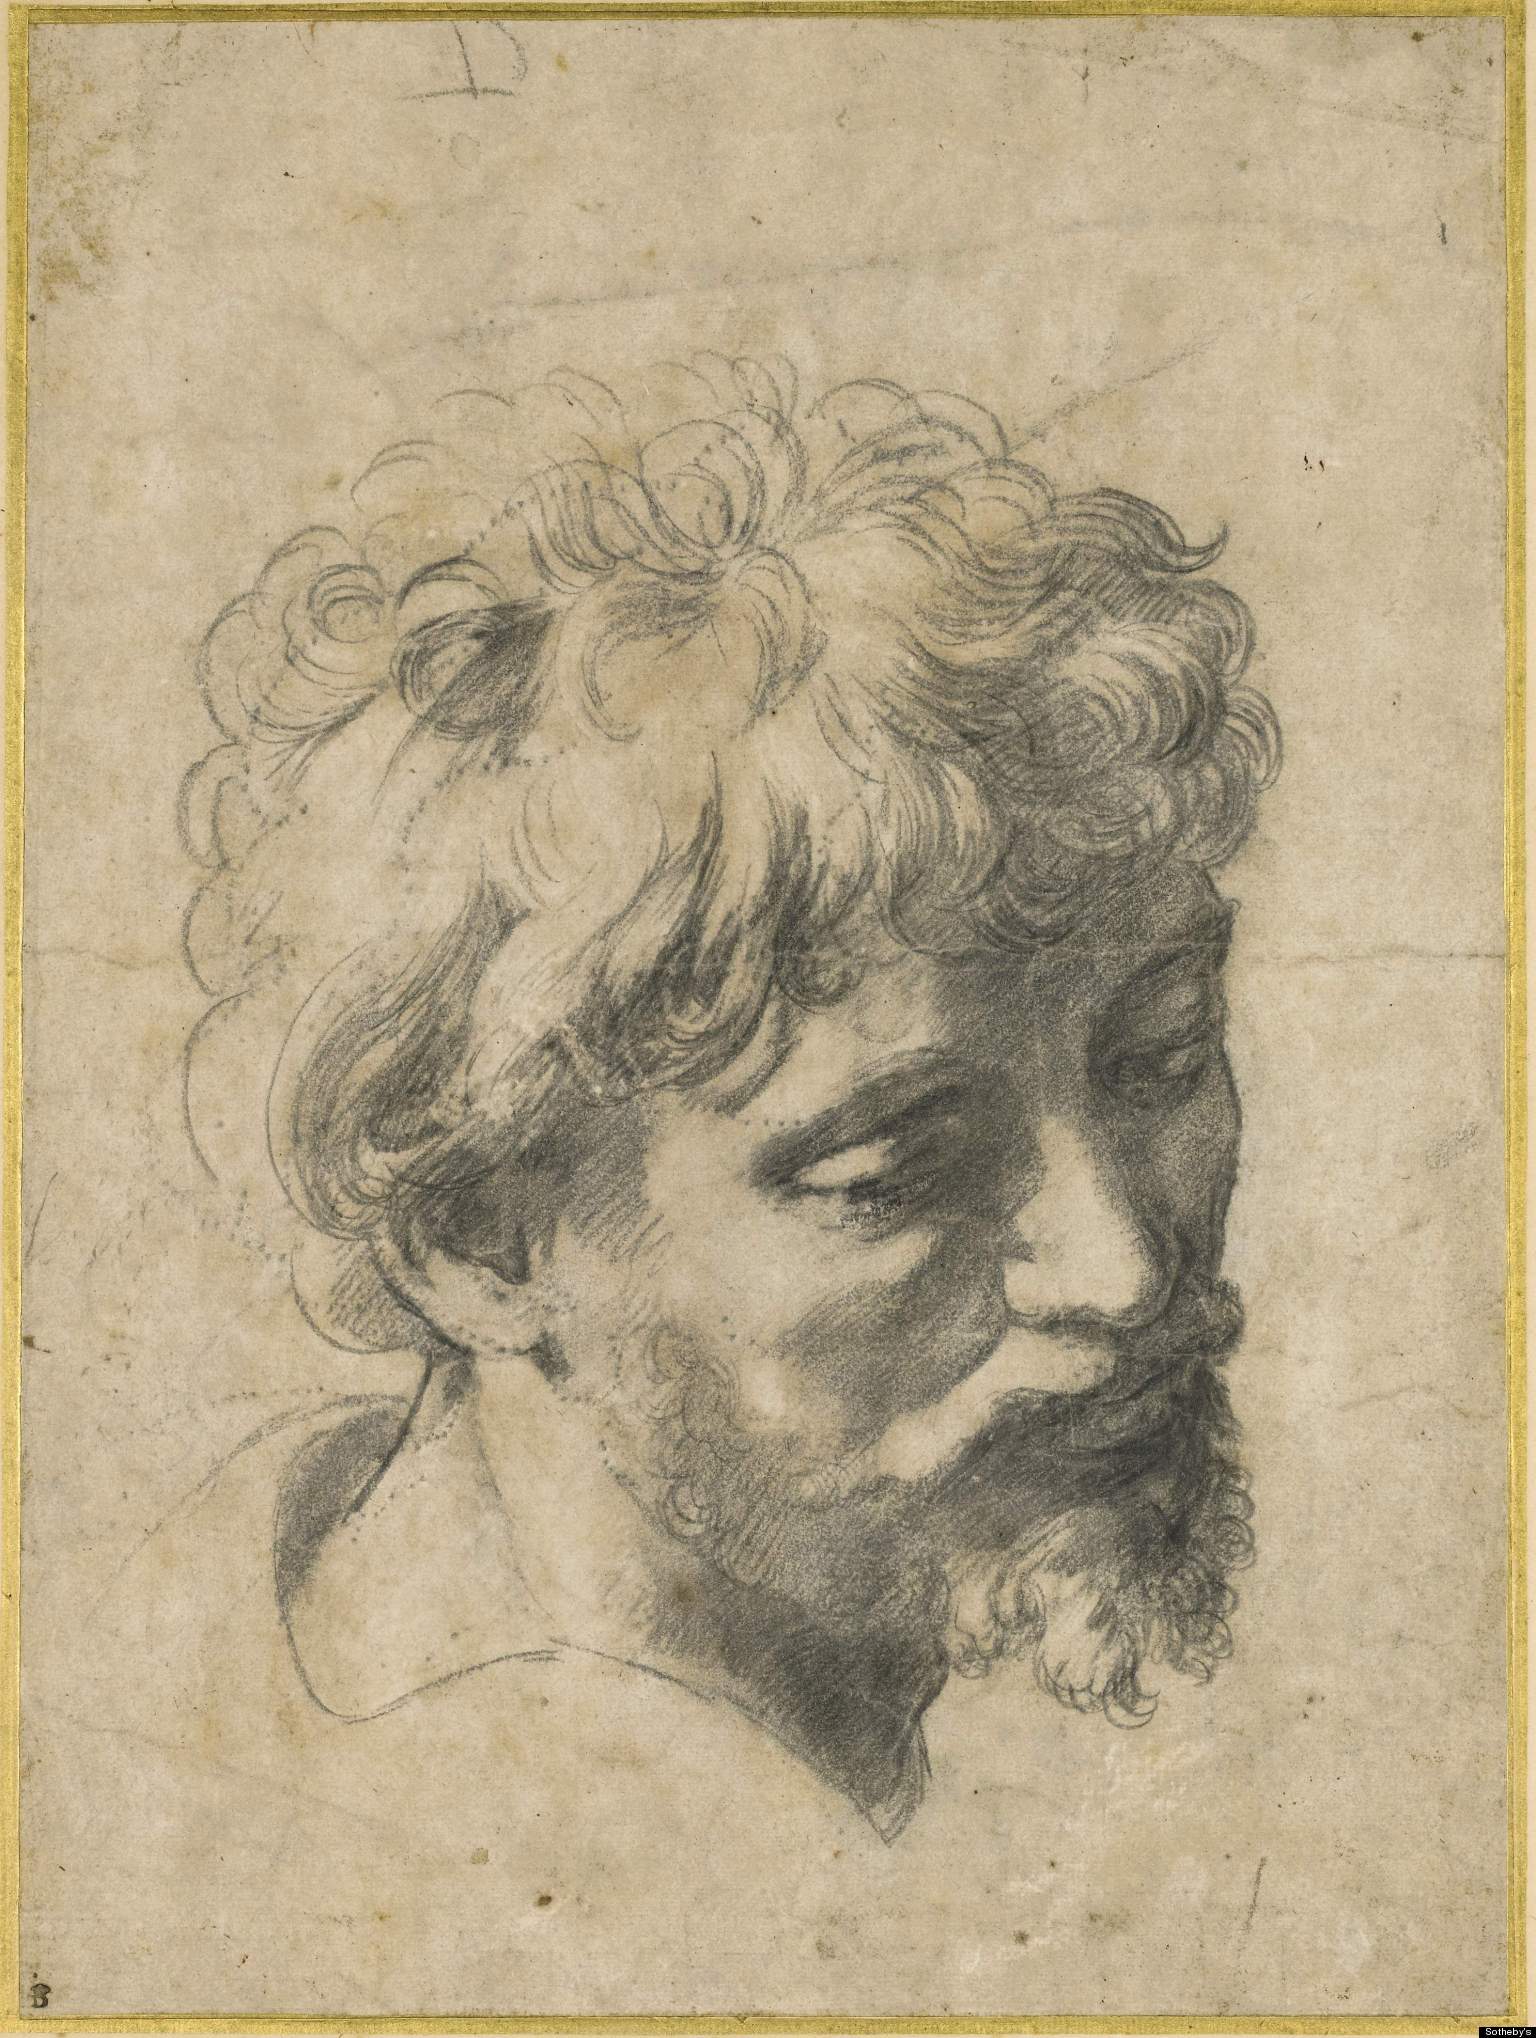 Raphael Drawing Sets Records At Sotheby's Old Masters Sale (PHOTO